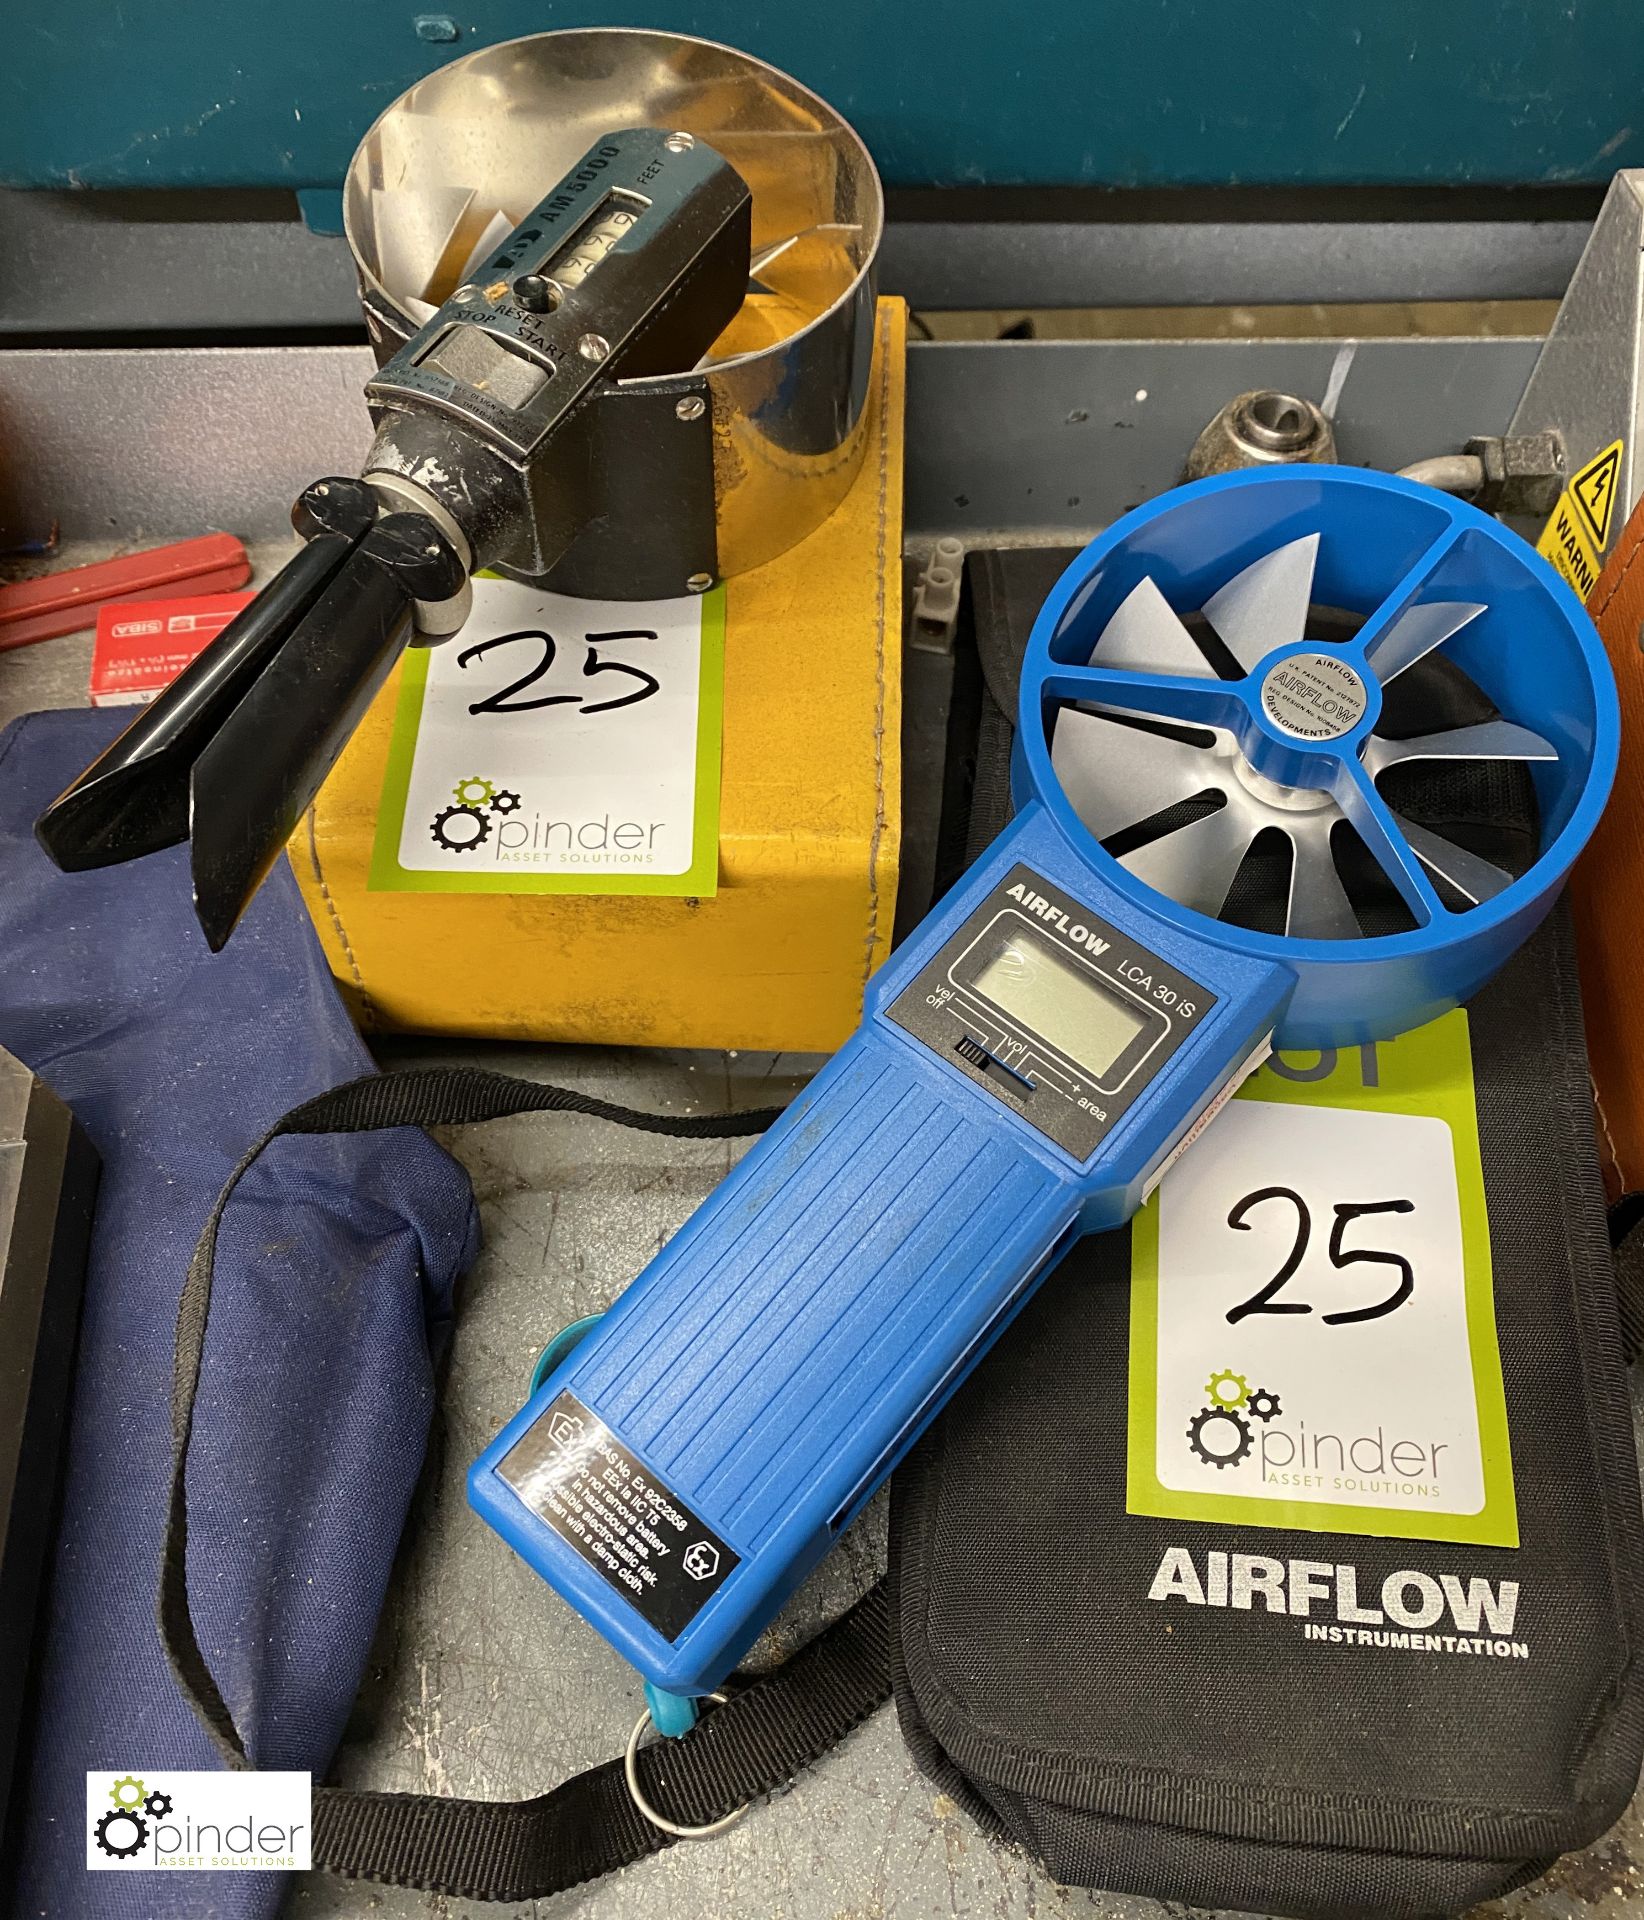 Airflow LCA30 iS and AD AM5000 Airflow Meters (located in Maintenance Workshop 1)